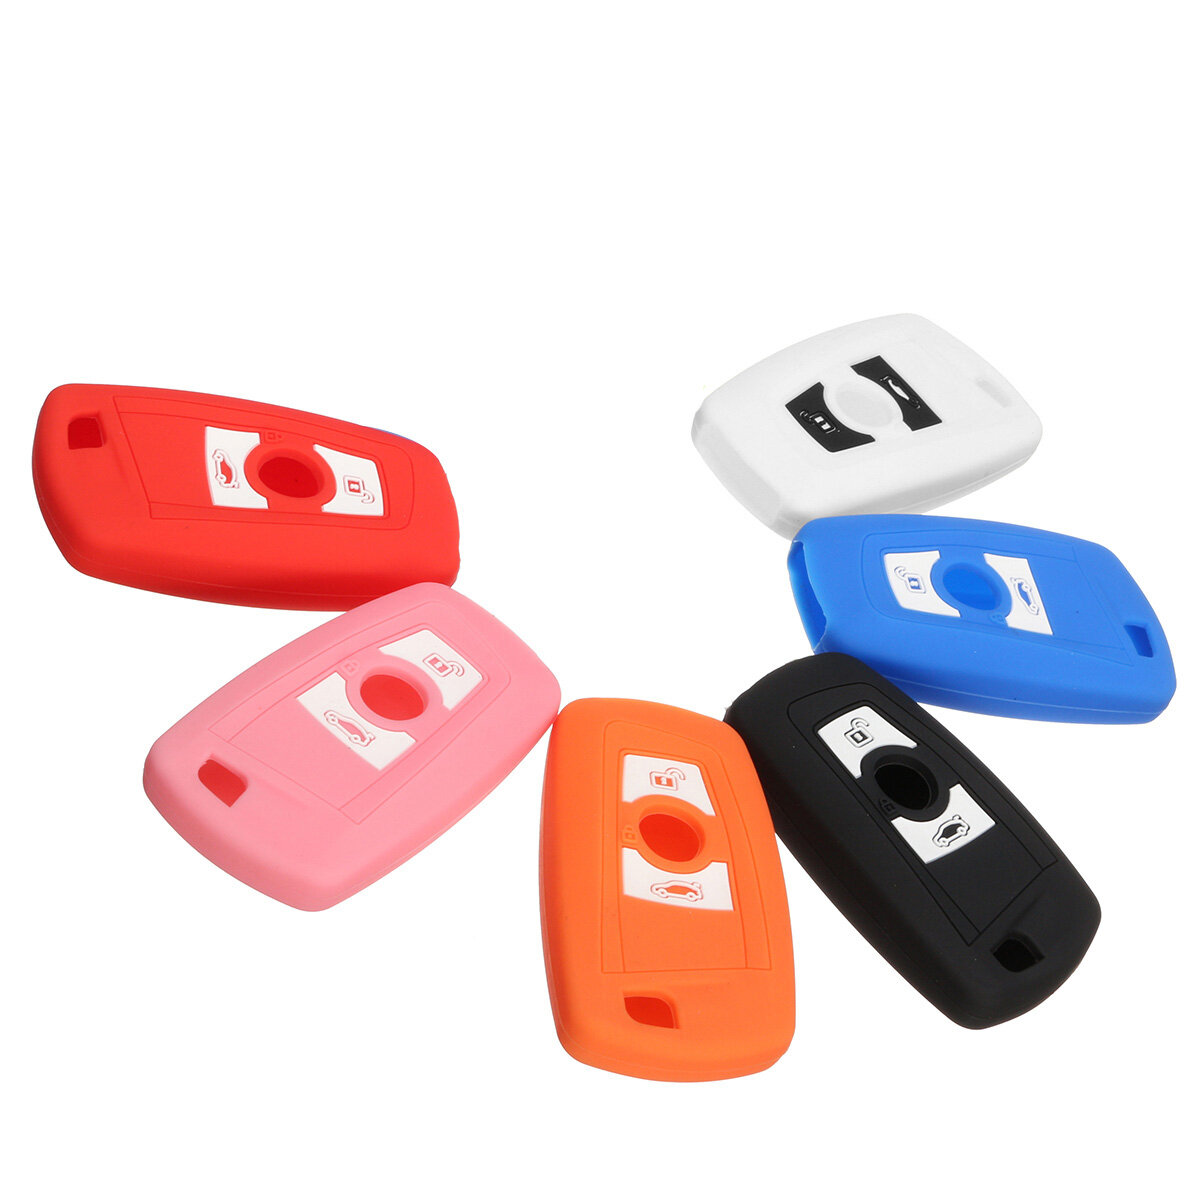 

2 Button Silicone Fob Remote Key Case Shell For BMW 1 2 3 5 7 Series F10 F20